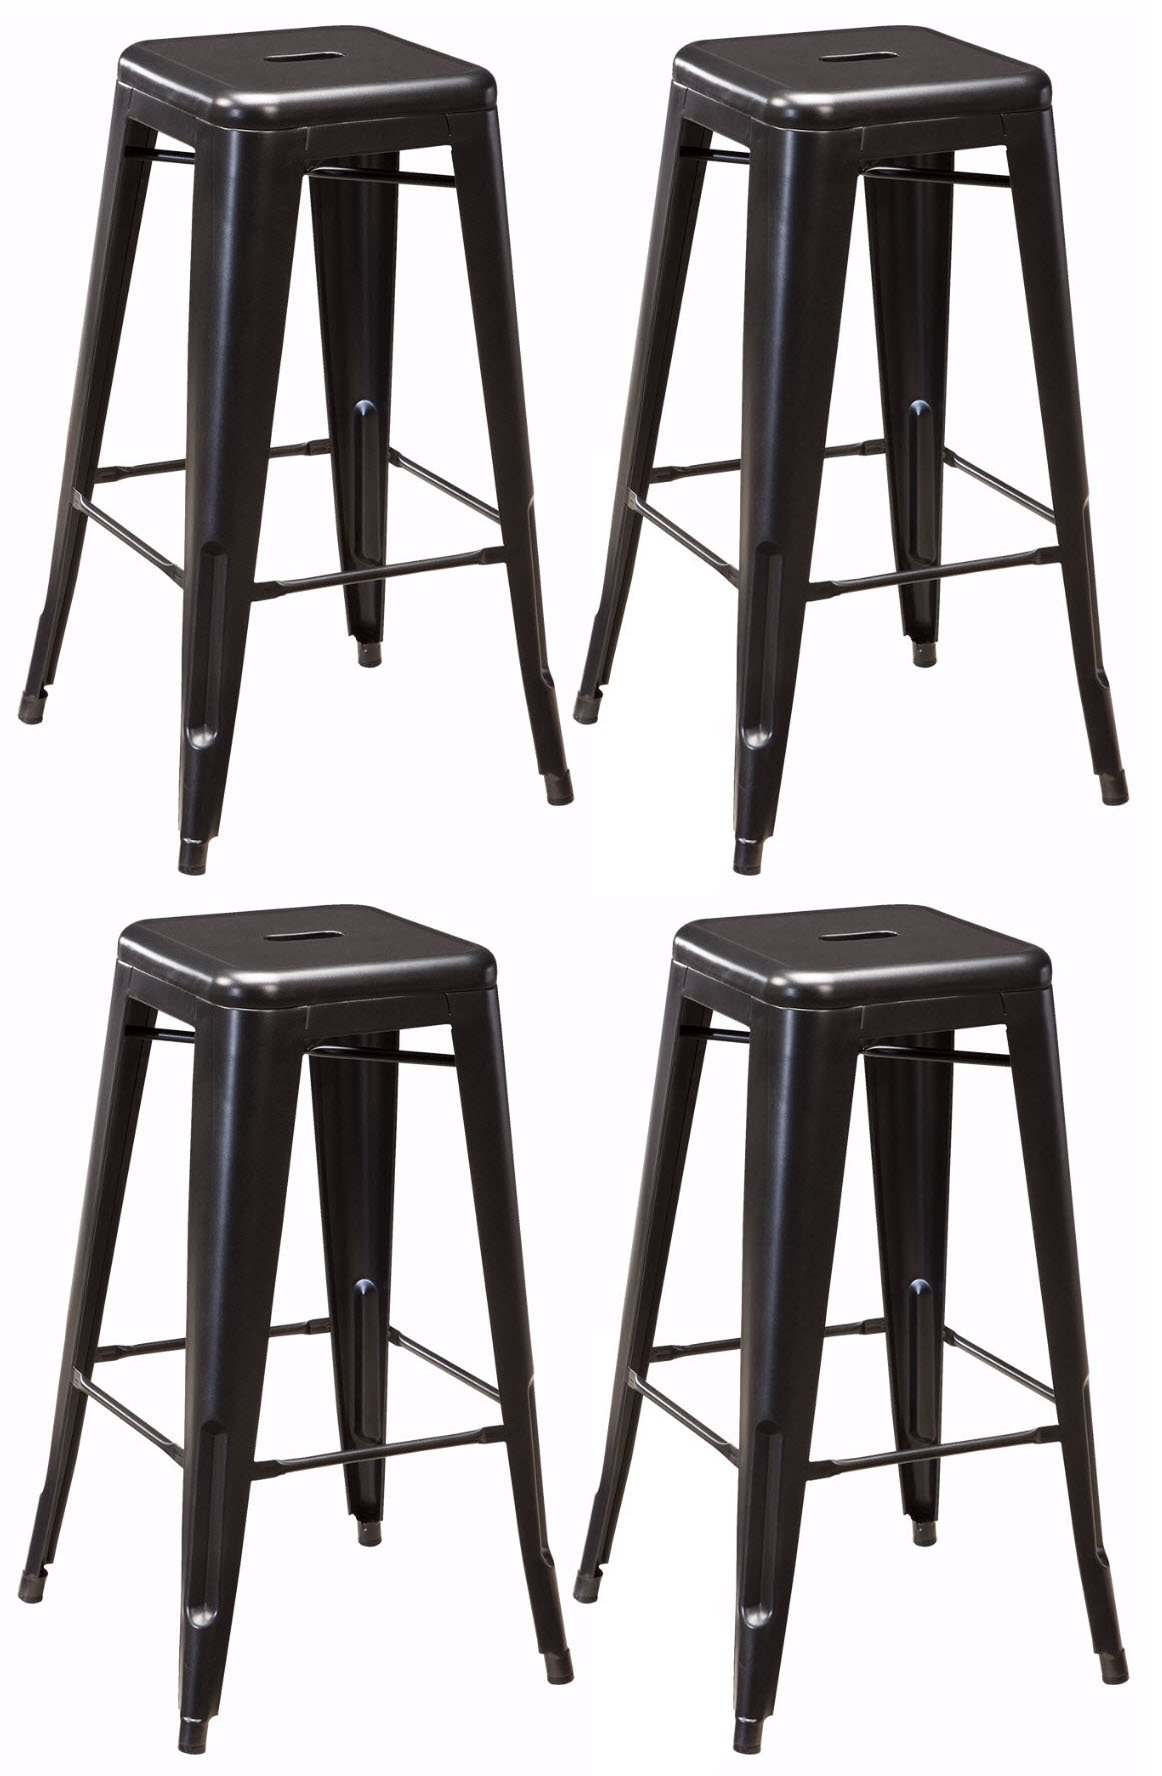 Signature Design by Ashley Furniture Signature Design - Pinnadel Barstool - Pub Height - Vintage casual - Set of 4 - gray